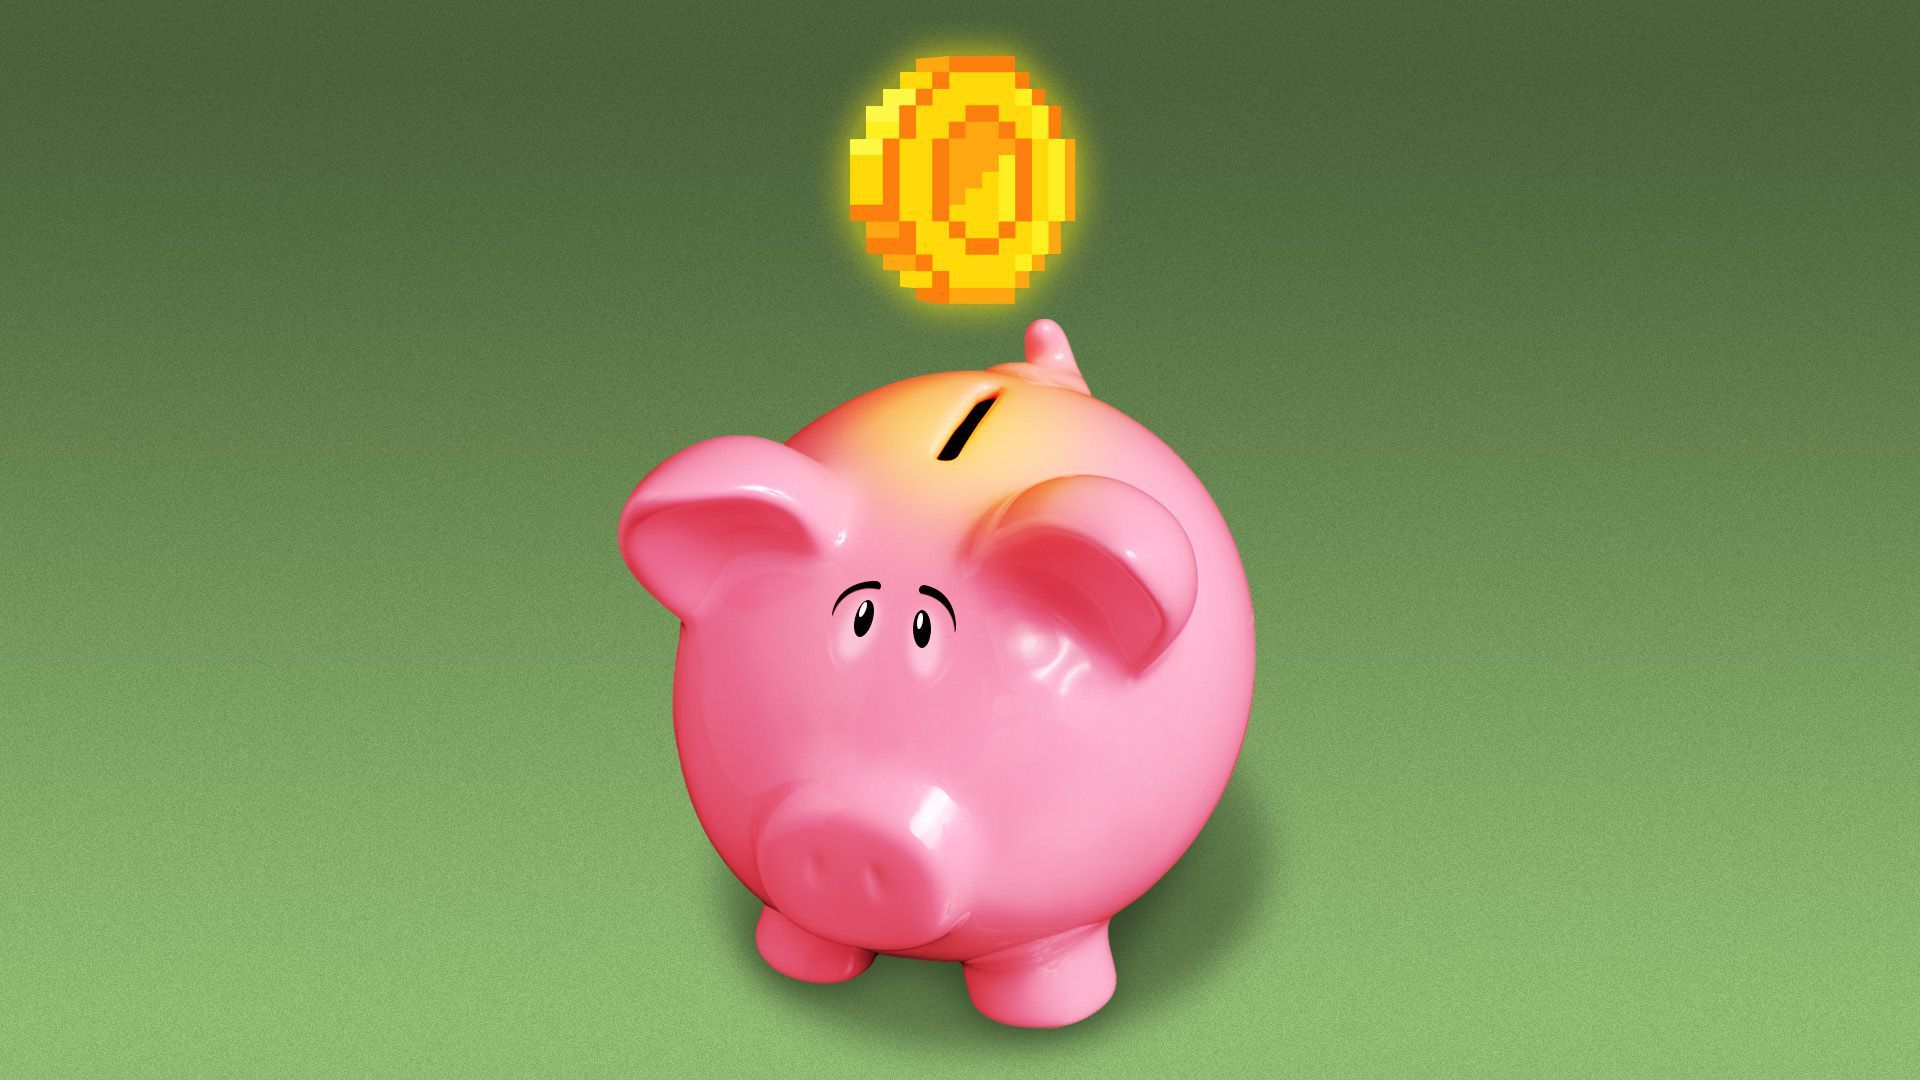 Illustration of a piggy bank looking up as a crypto coin floats above it